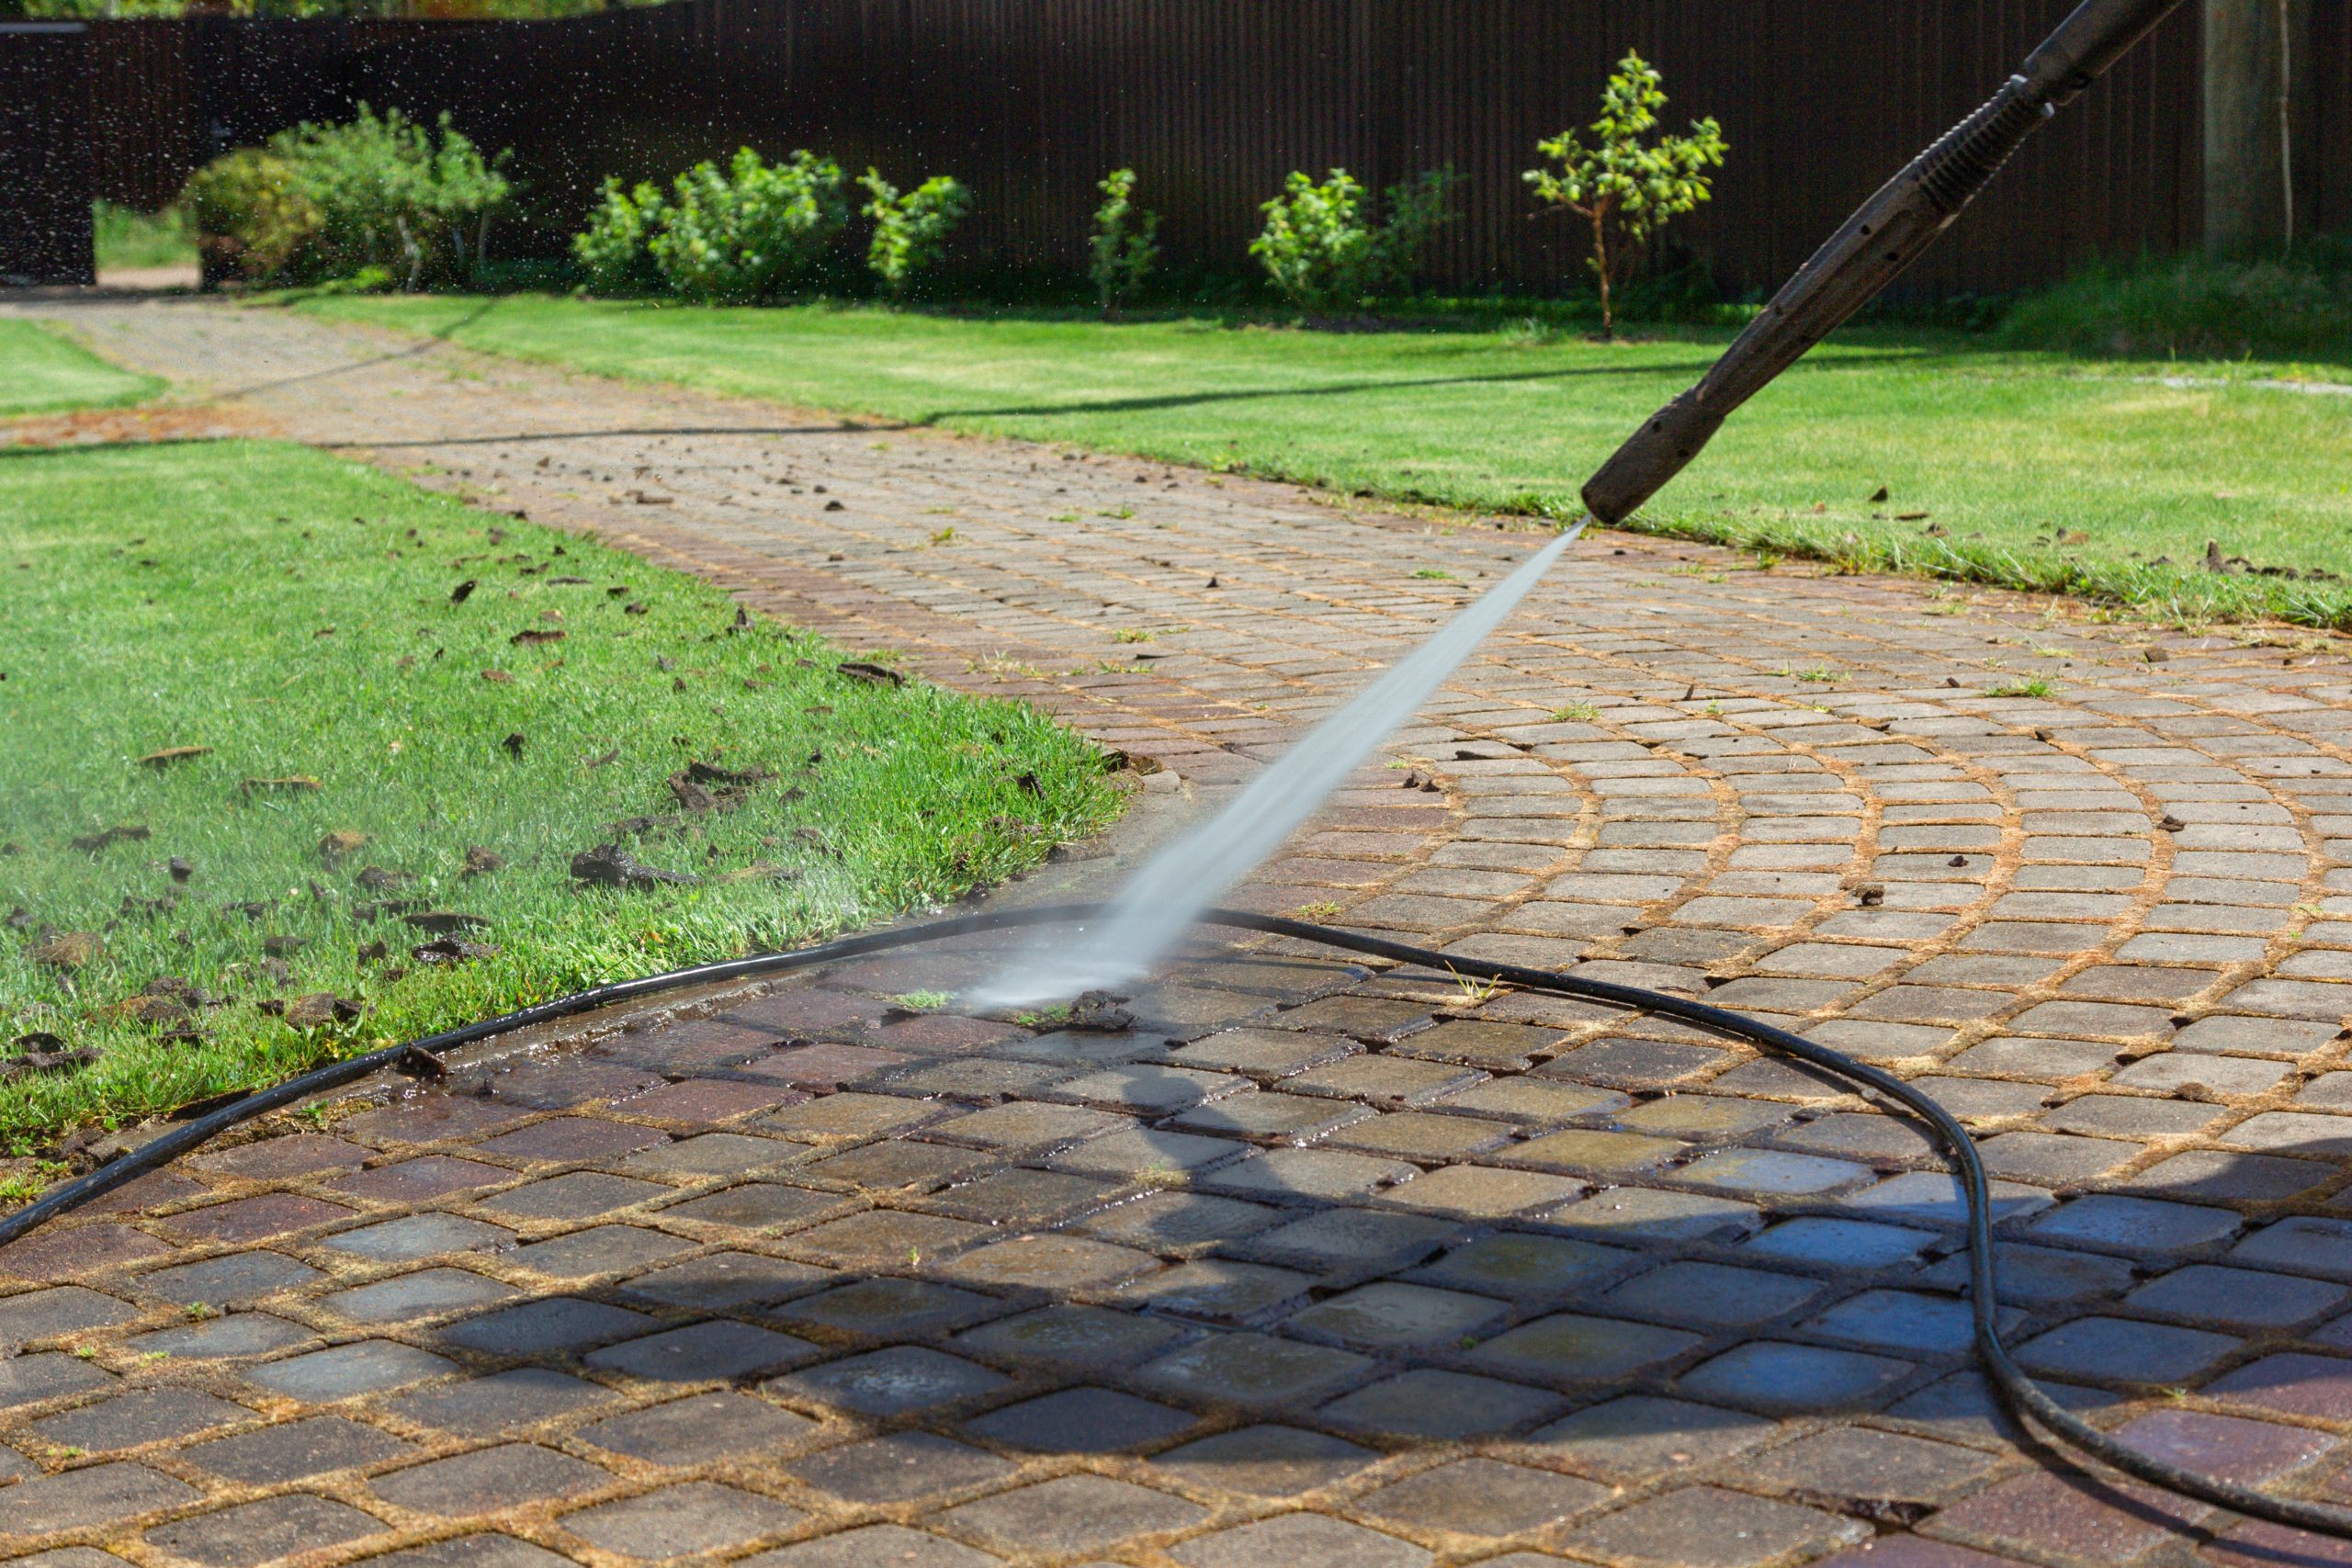 Home - Indio Window Cleaning & Pressure Washing Services